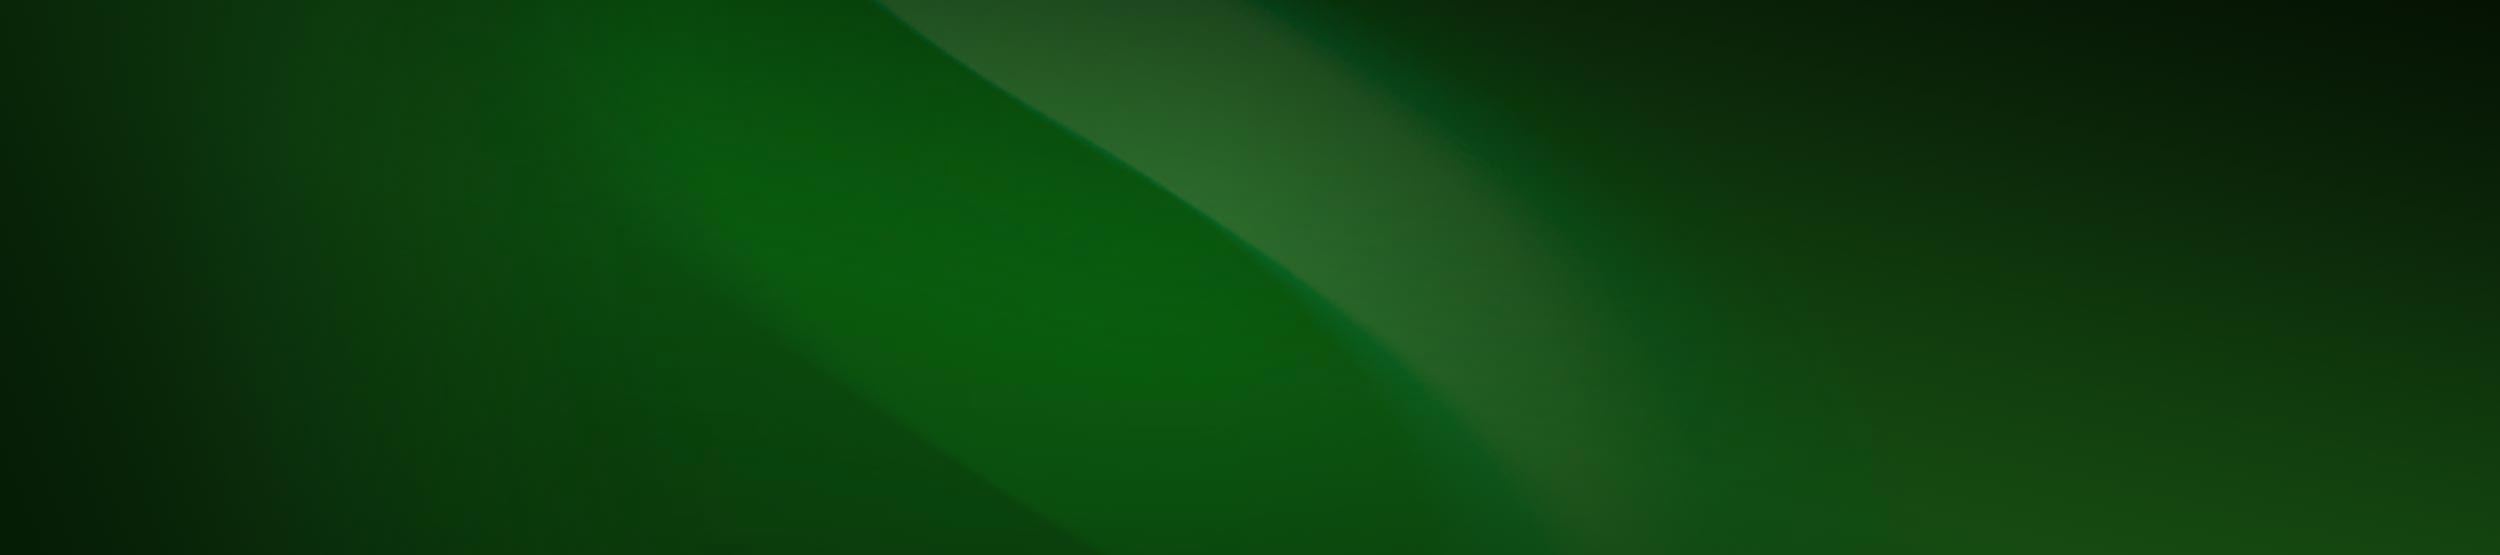 shannons green background banner